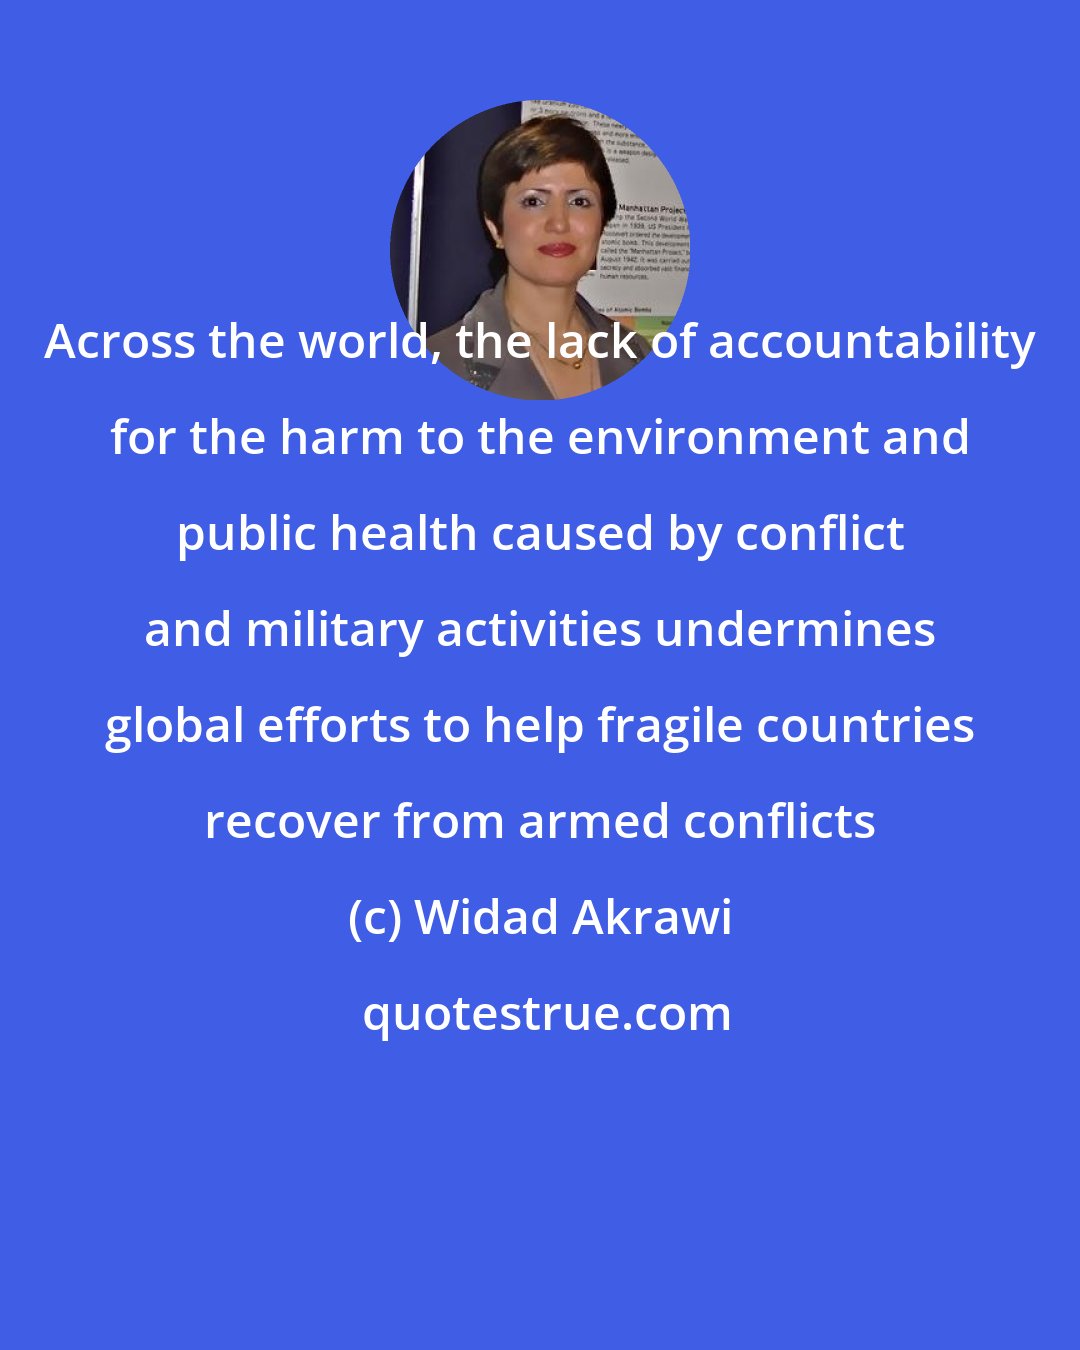 Widad Akrawi: Across the world, the lack of accountability for the harm to the environment and public health caused by conflict and military activities undermines global efforts to help fragile countries recover from armed conflicts